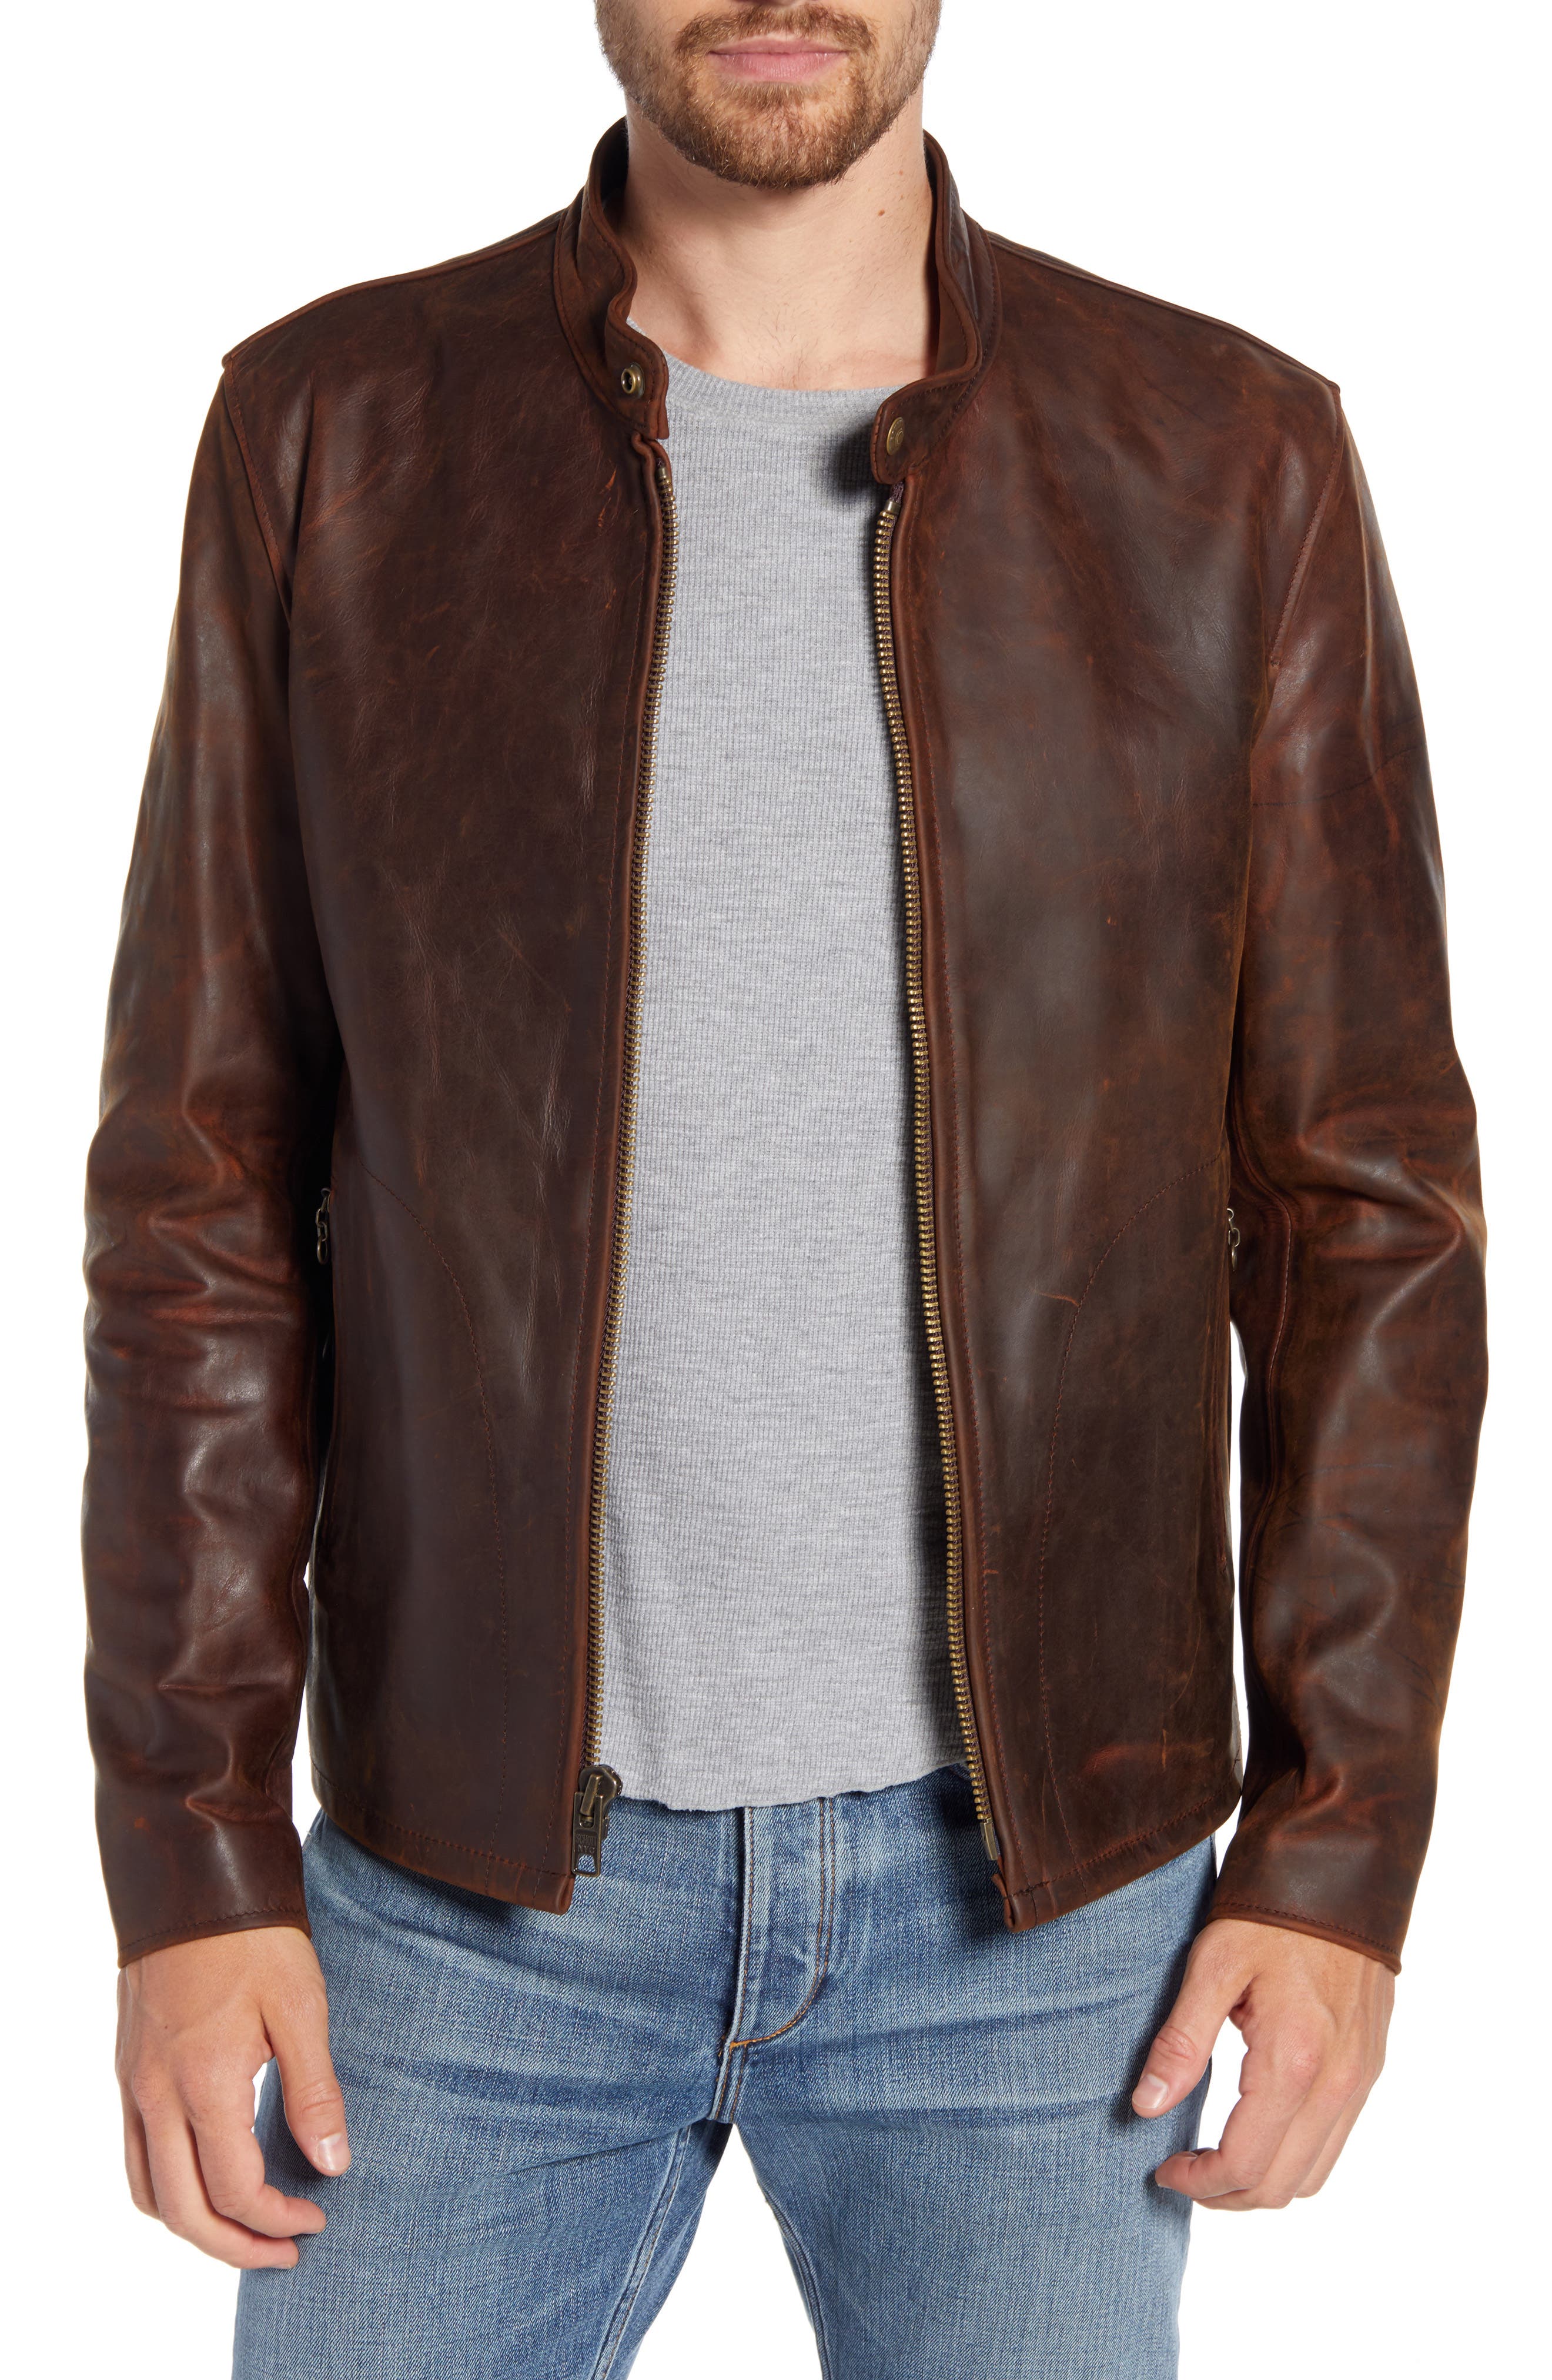 UNAFFECTED Contrast Panel Leather Jacket in Walnut Brown for Men Brown Mens Clothing Jackets Leather jackets 